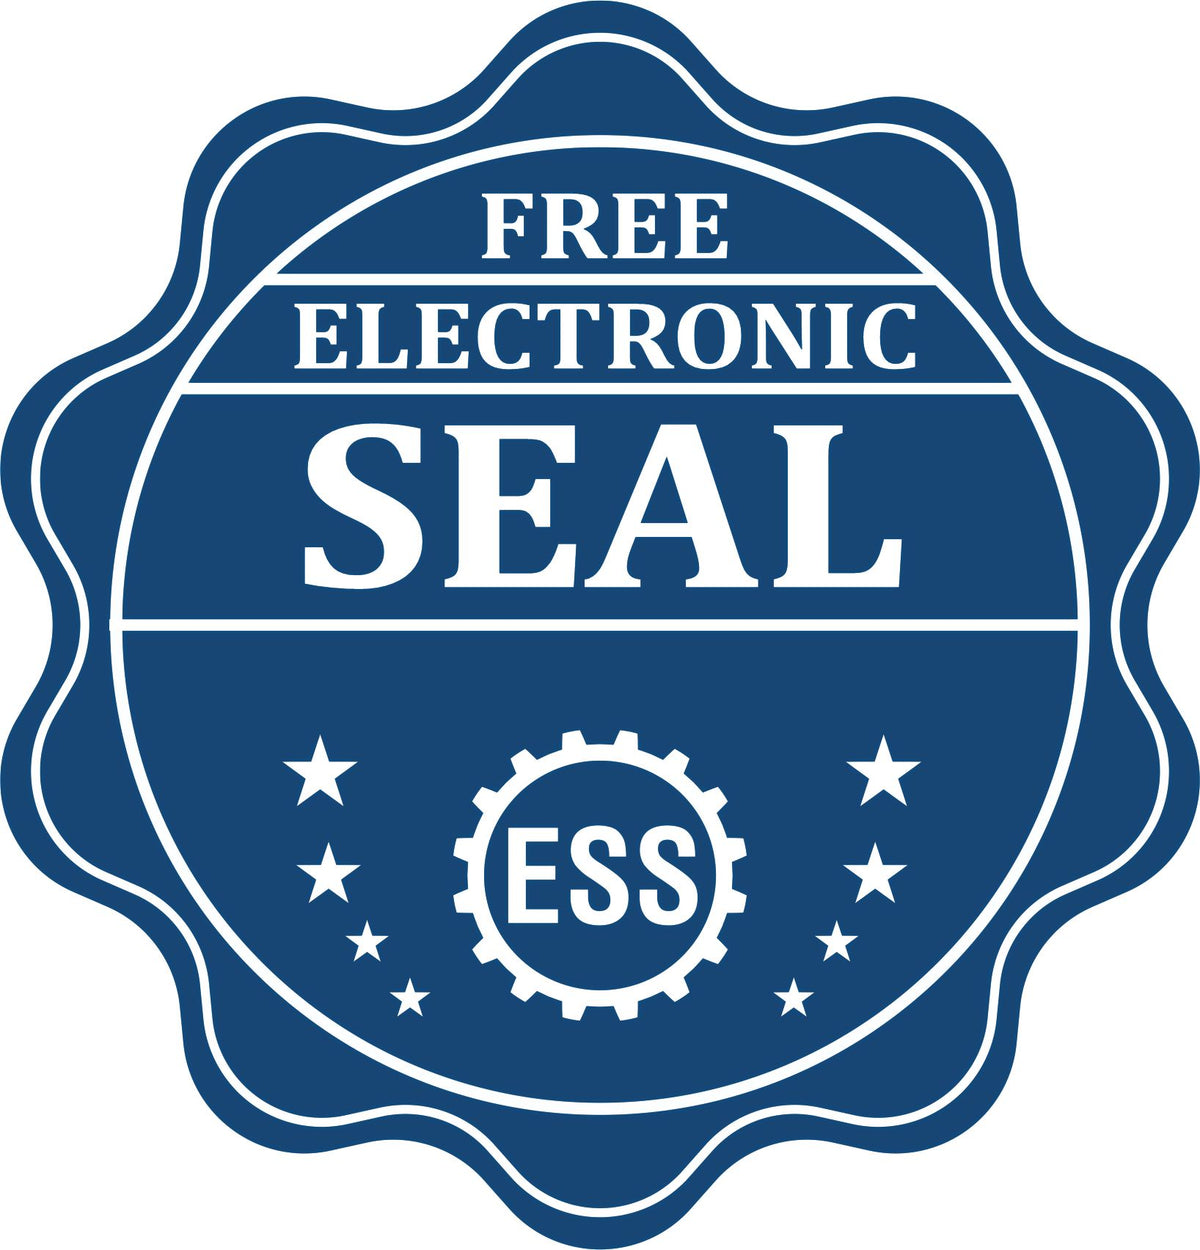 A badge showing a free electronic seal for the Wooden Handle Ohio State Seal Notary Public Stamp with stars and the ESS gear on the emblem.